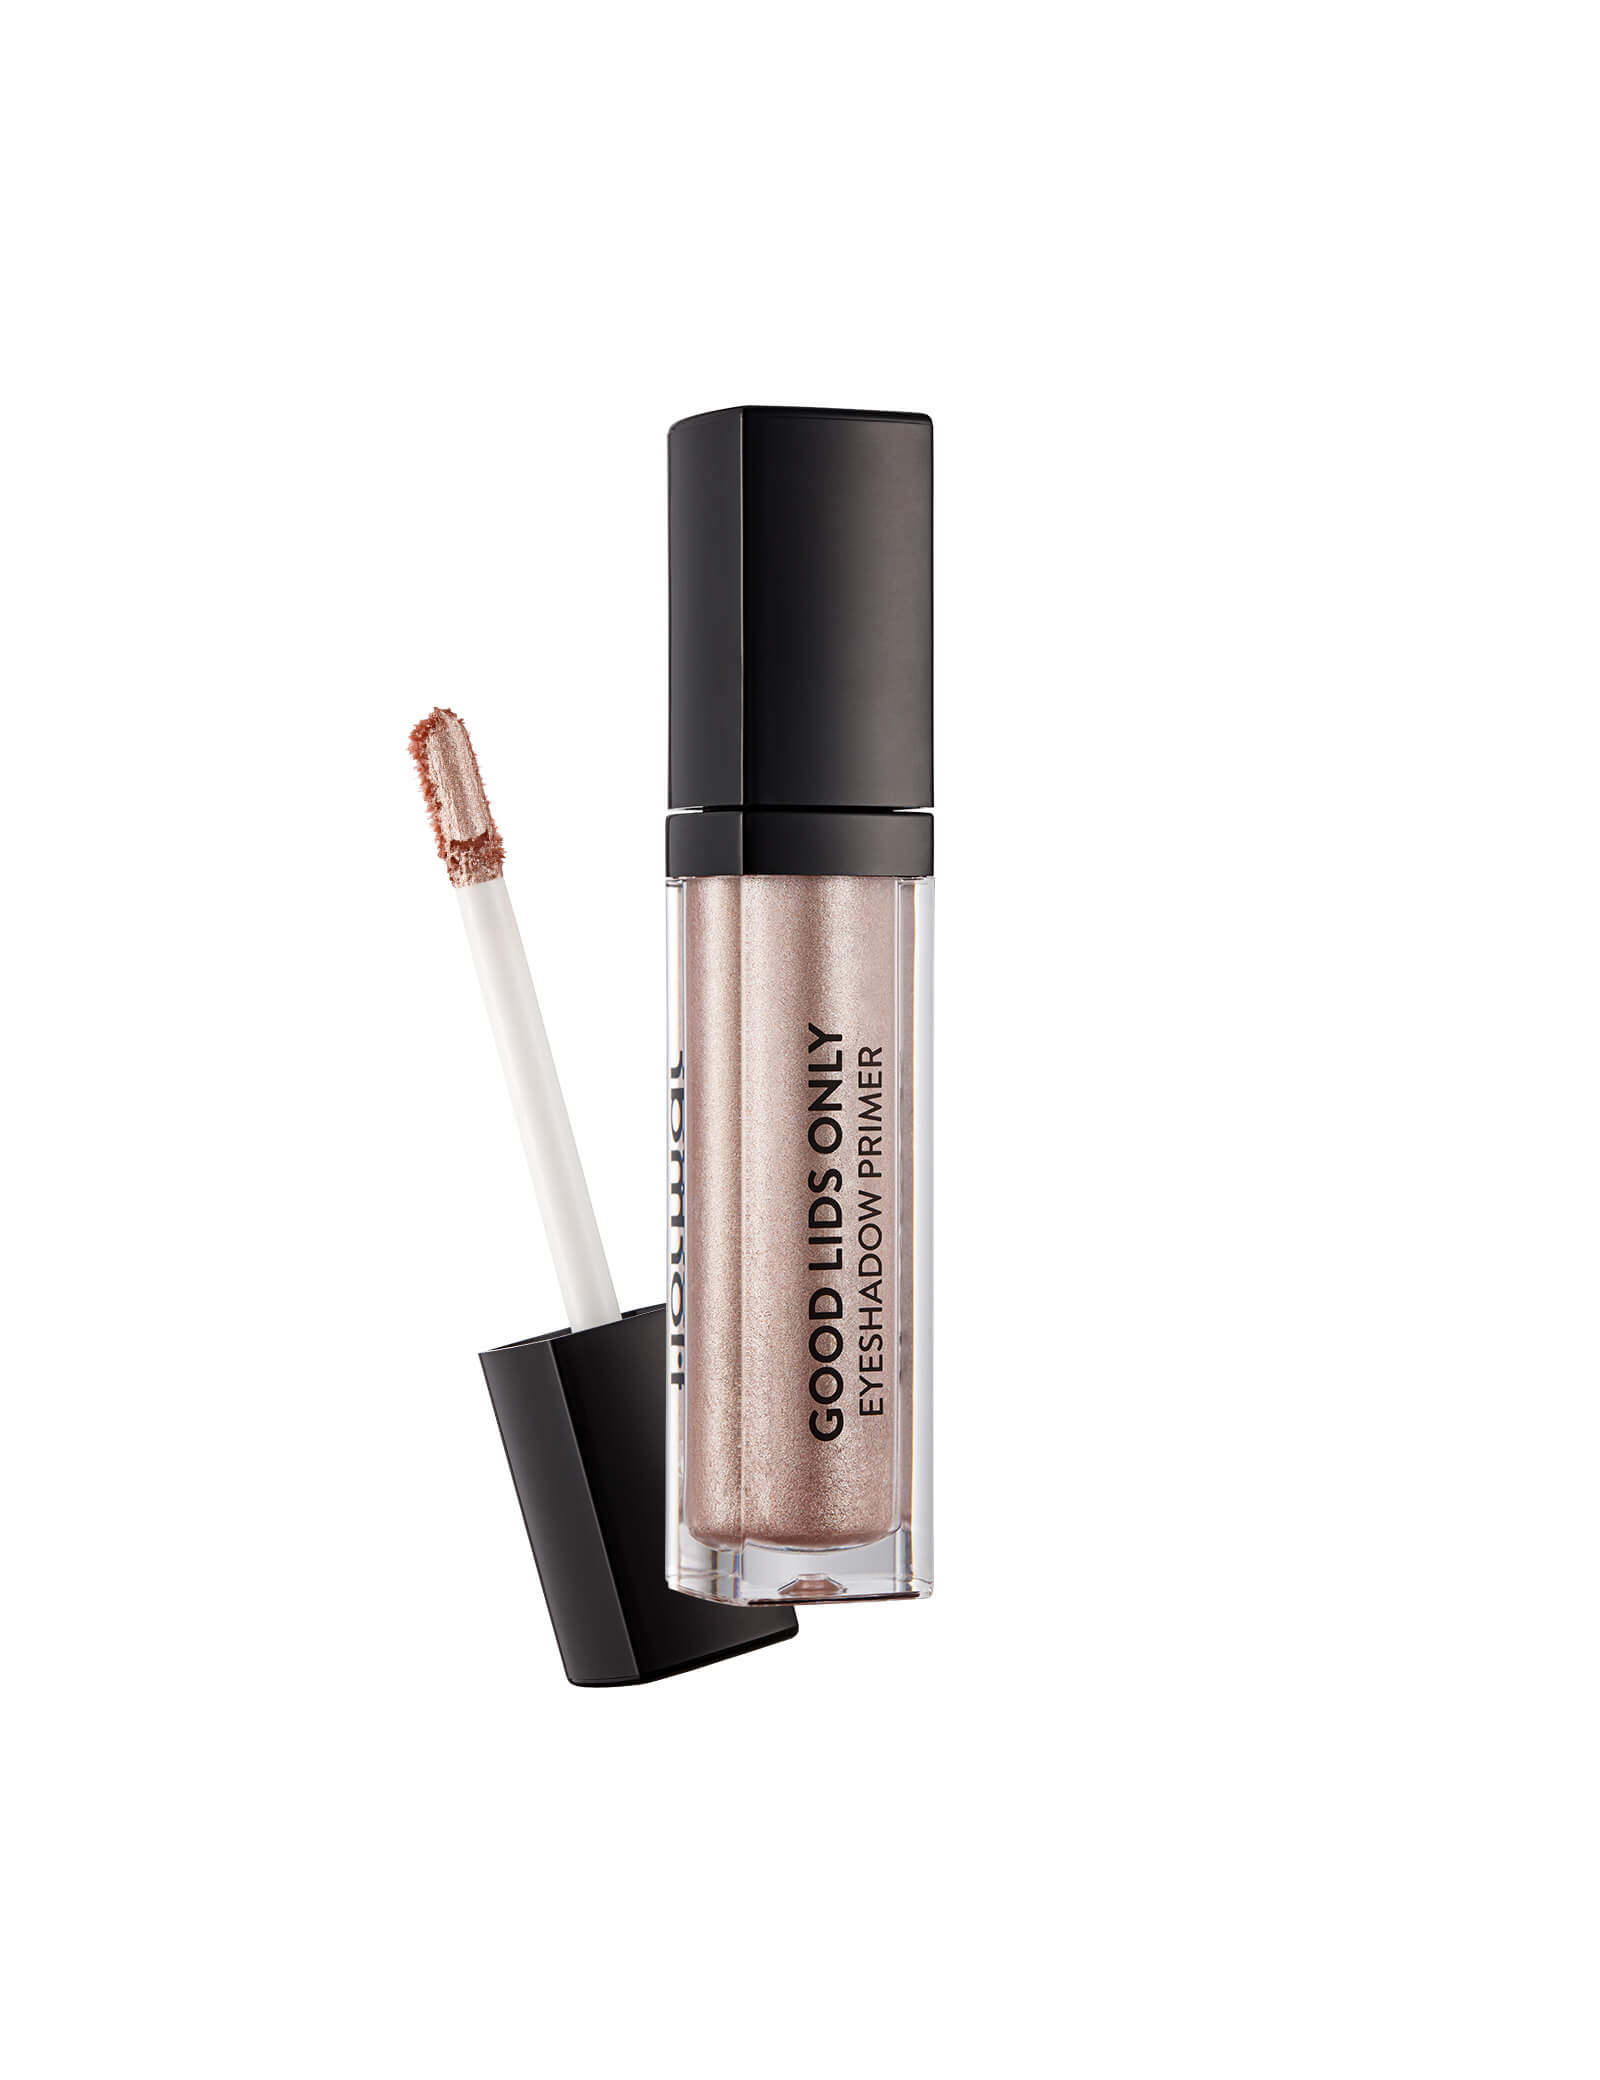 Good Leeds Only Eyeshadow Primer - 002 Shimmering Sand by Flormar